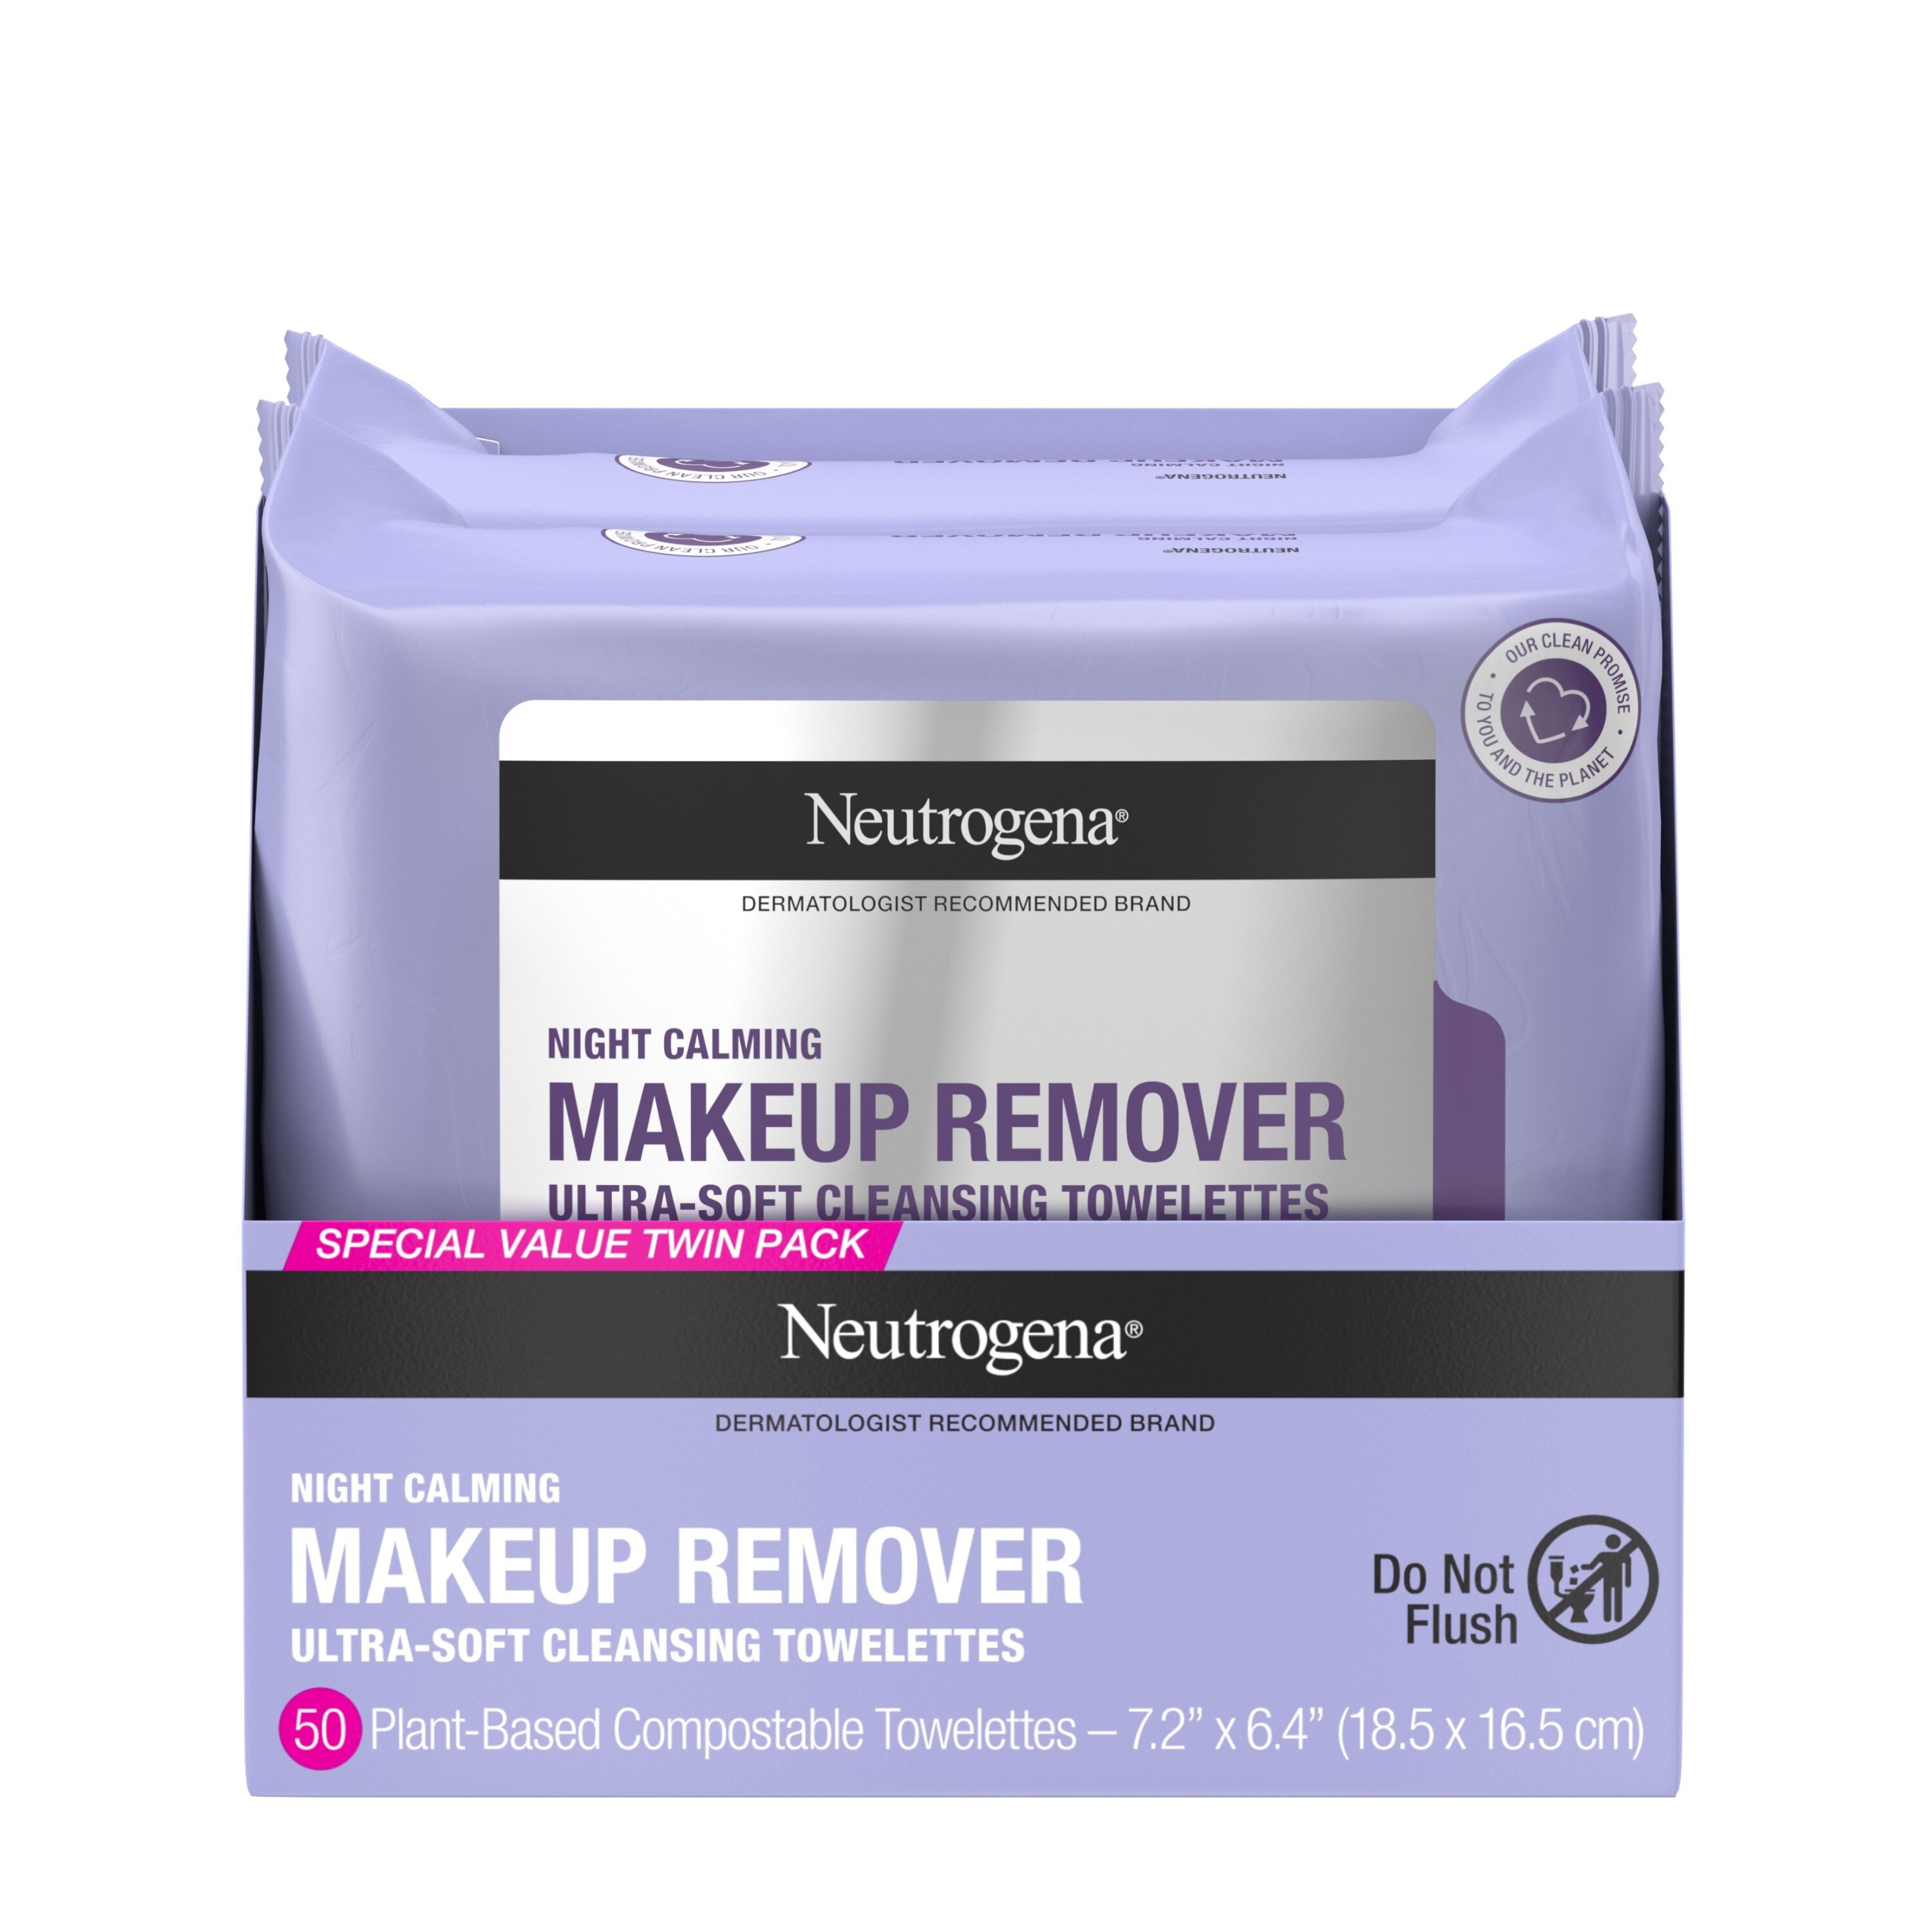 Neutrogena Makeup Remover Night Calming Cleansing Face Wipes, Twin Pack, 50CT